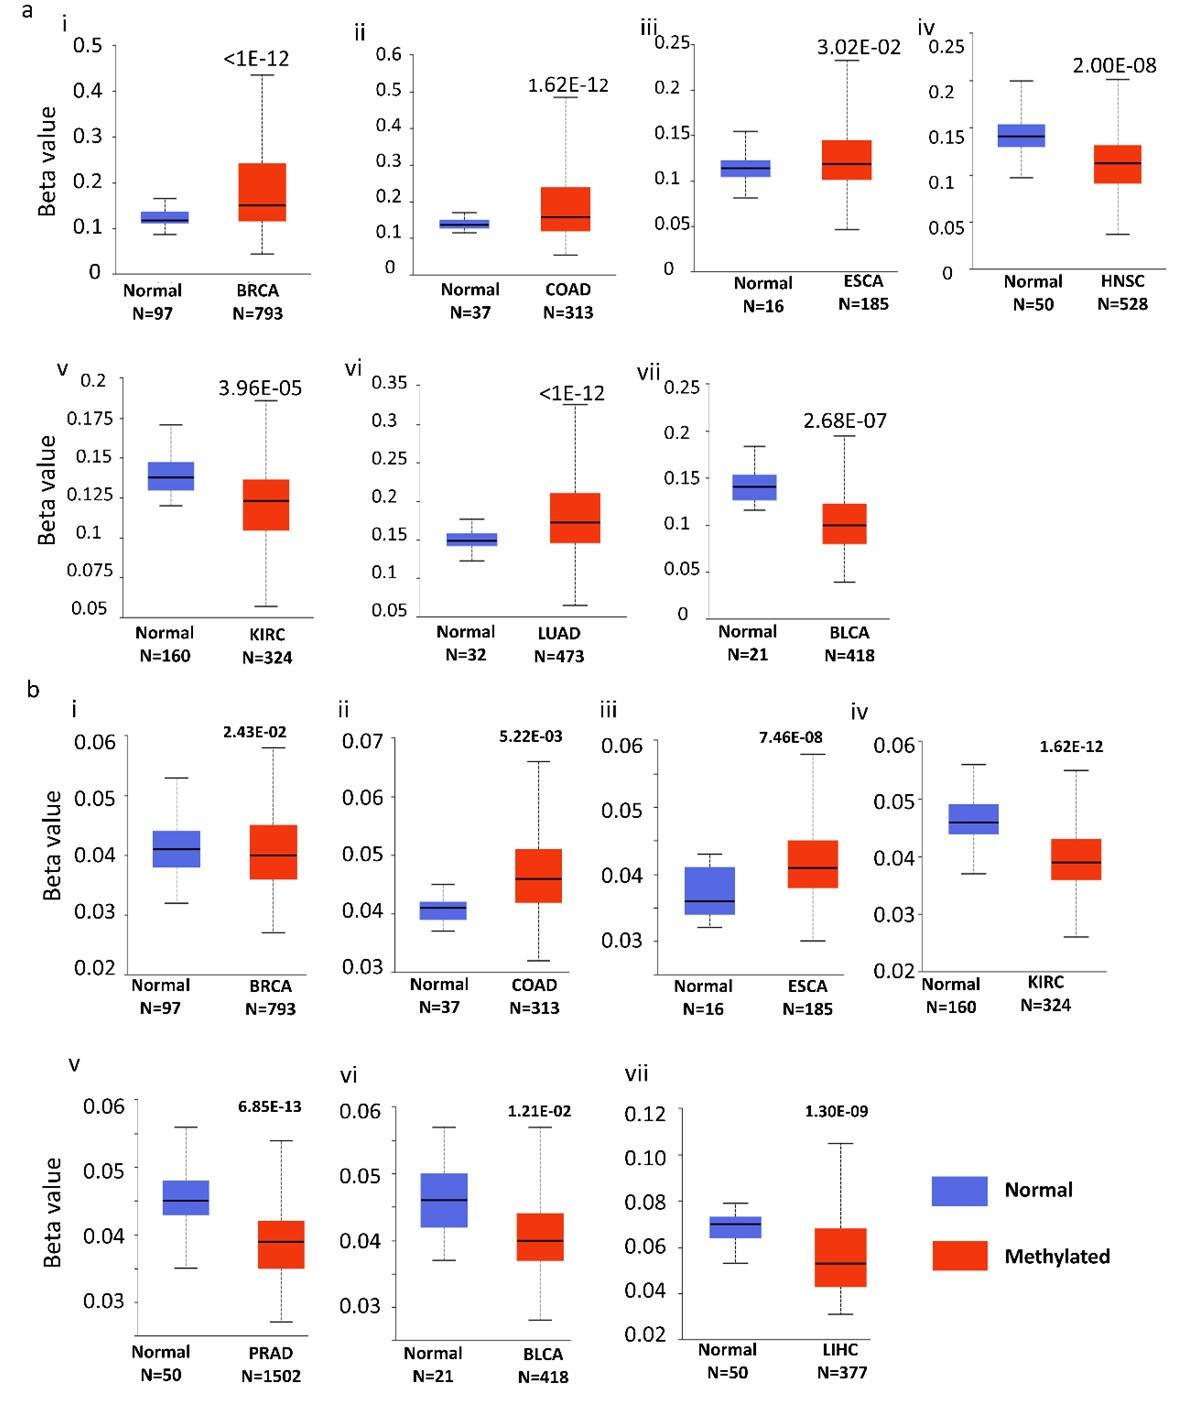 HTRA1 and HTRA2 expression differentially modulate the clinical prognosis of cancer: a multi-omics analysis using bioinformatics approaches